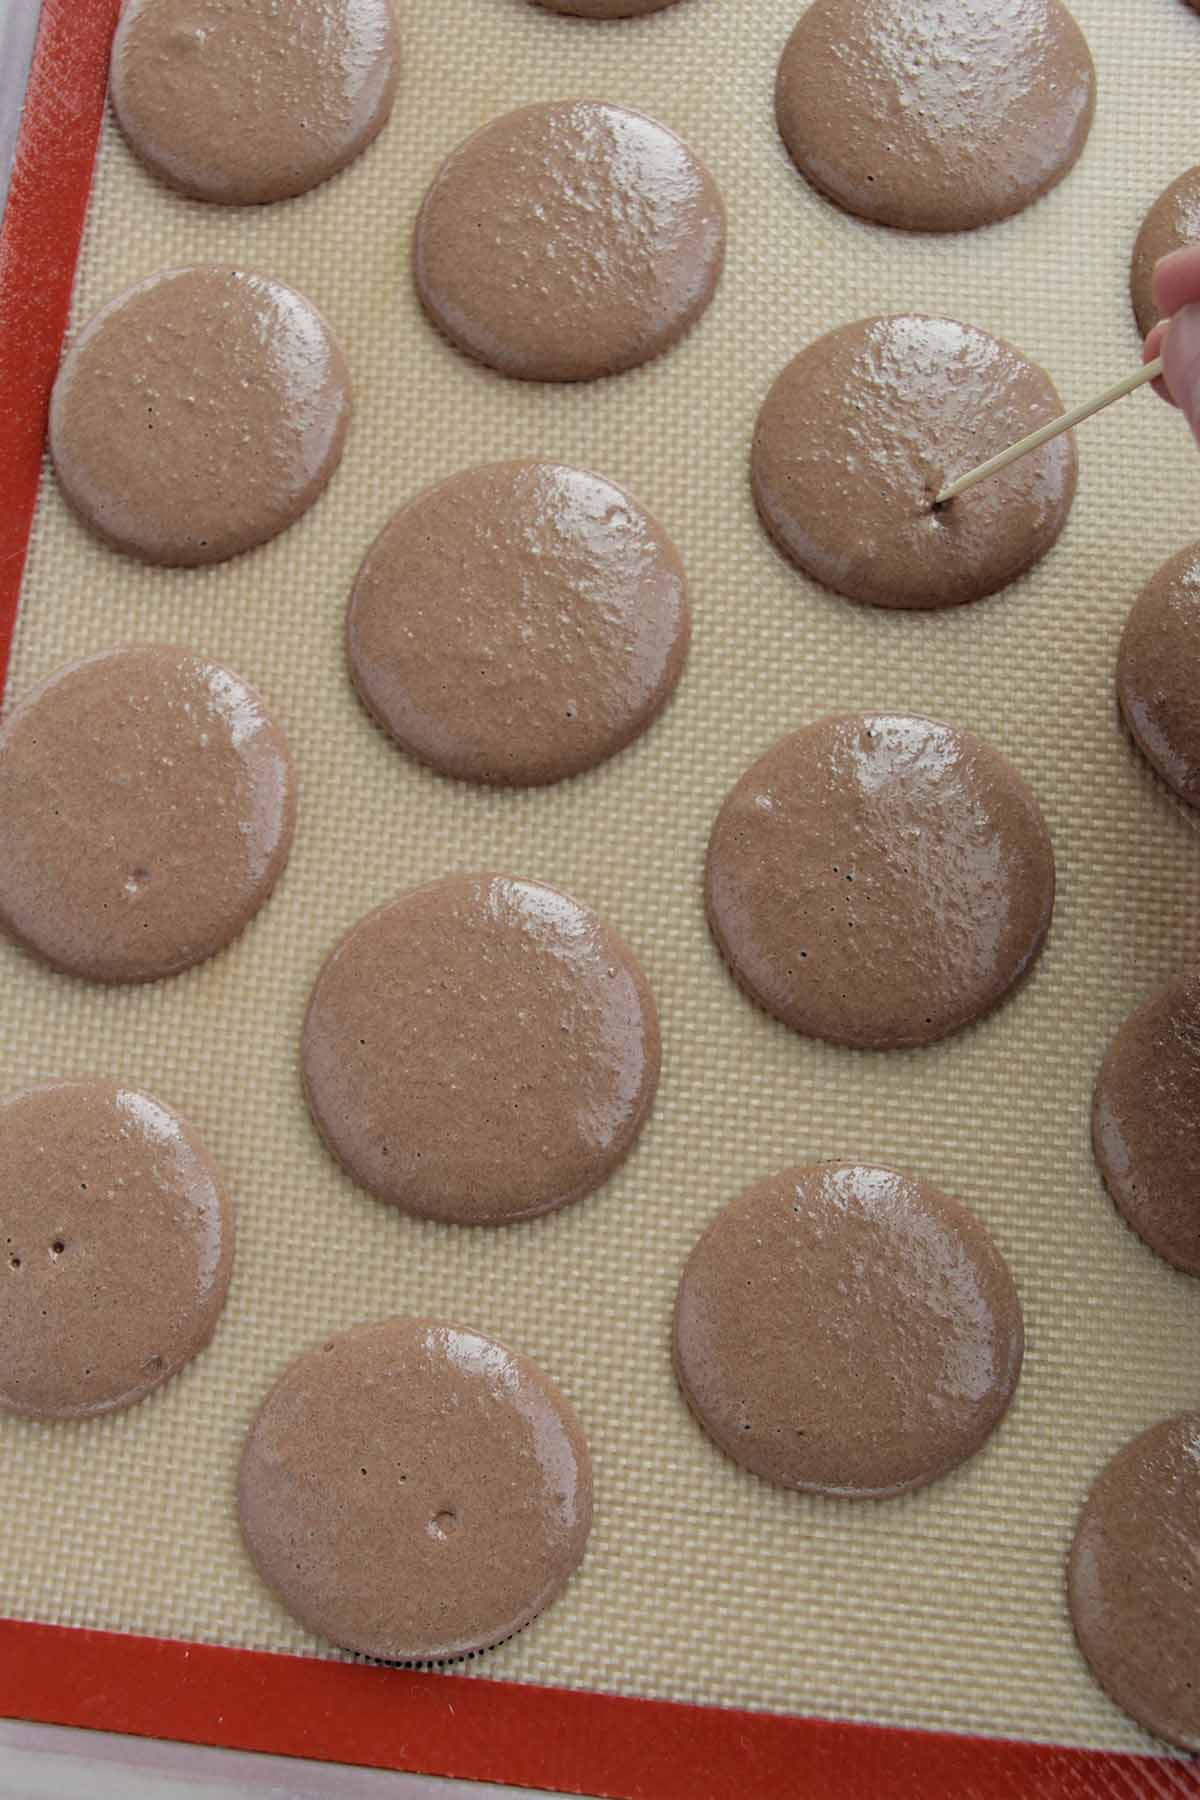 popping chocolate macaron air bubbles with a toothpick.